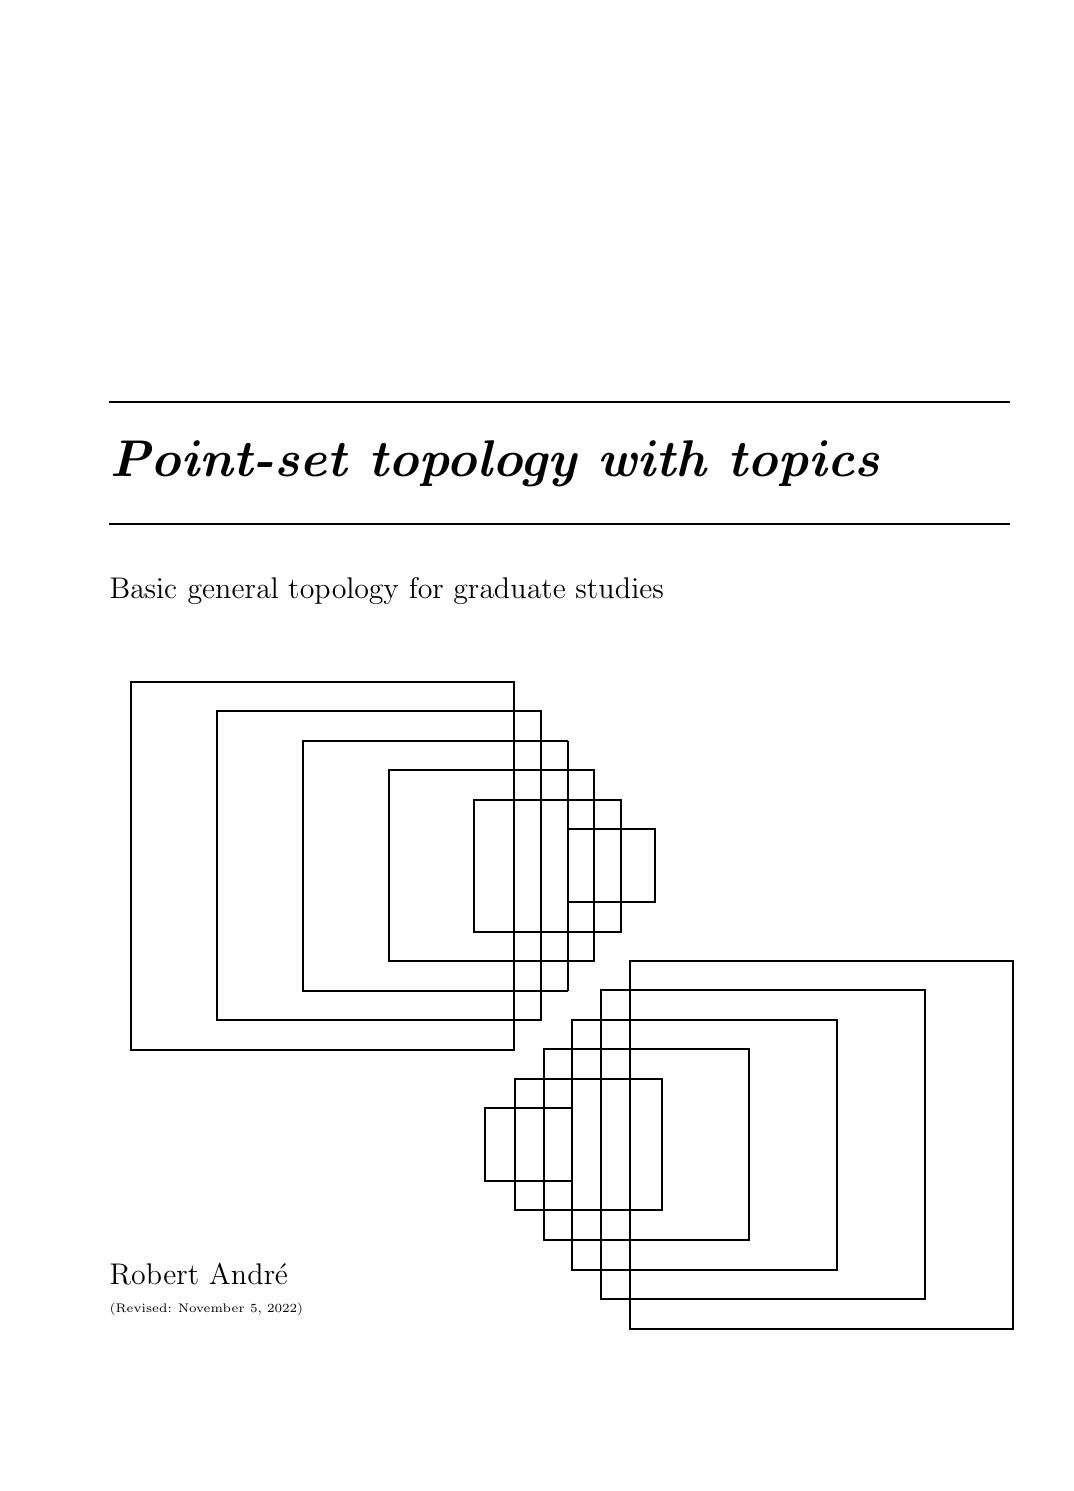 Point-set topology with topics by Andre R